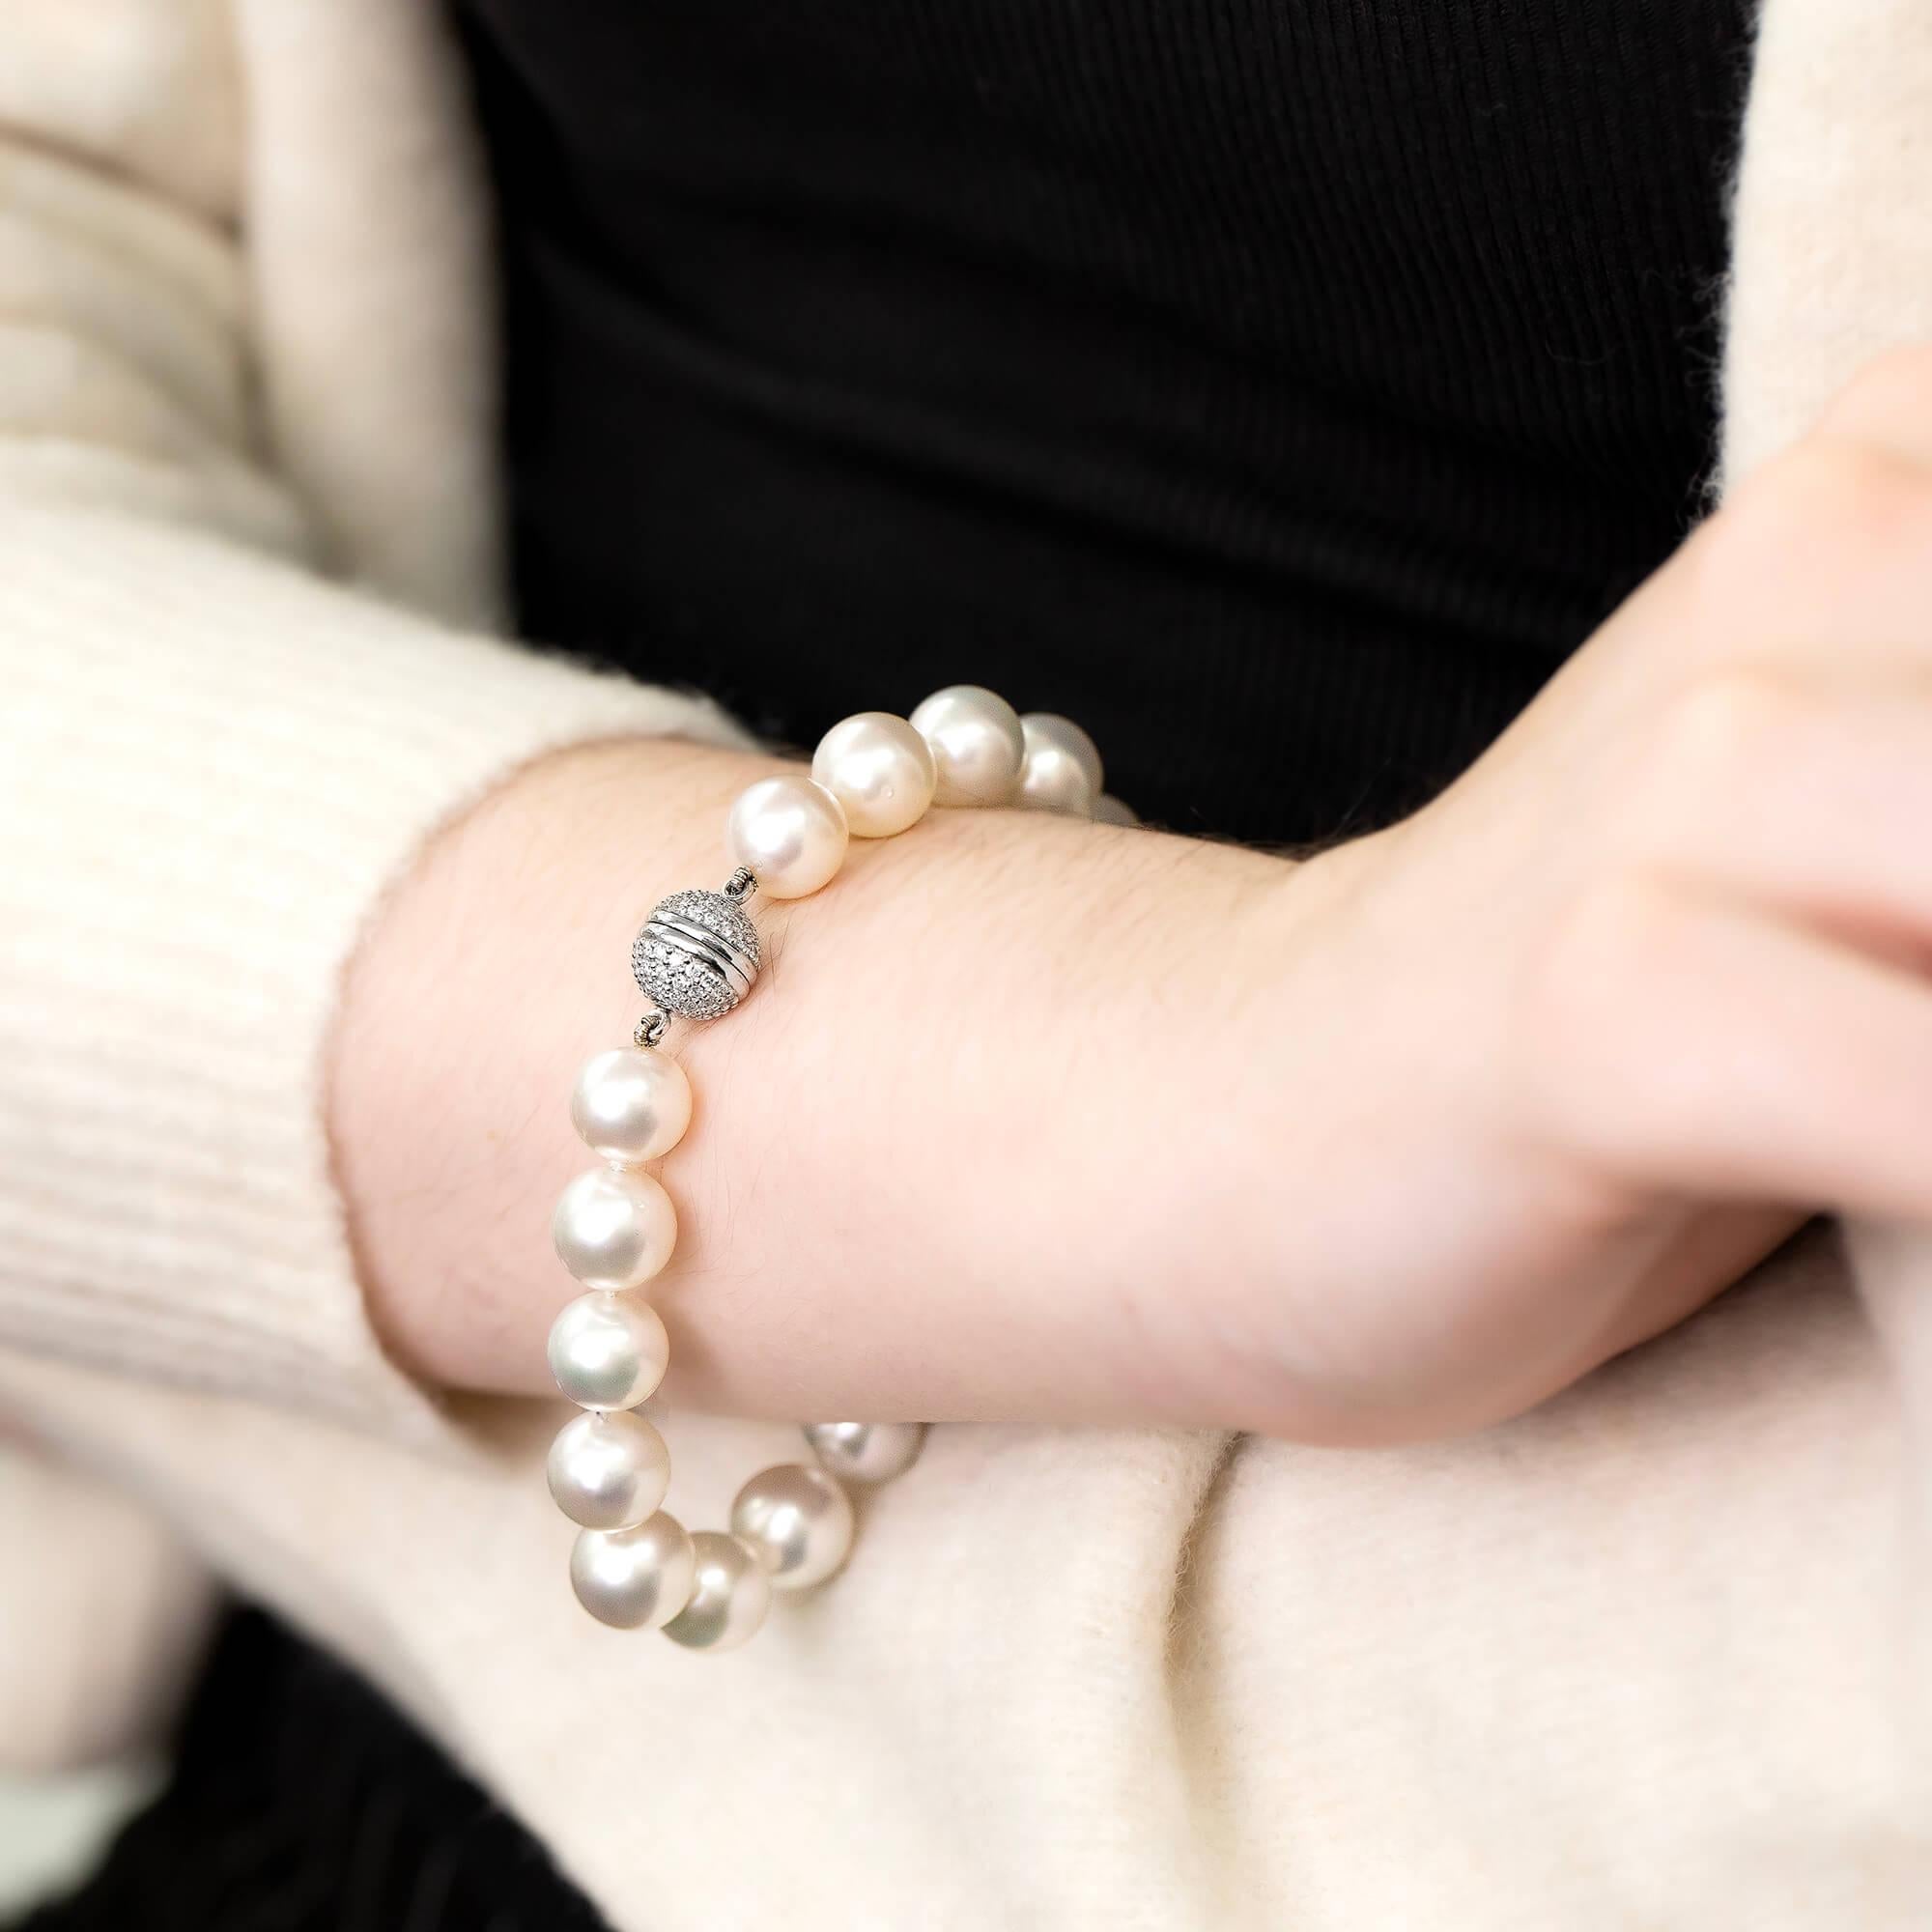 Modern South Sea pearl bracelet with individually knotted pearls and a diamond set clasp. The clasp has a threaded post to screw in for secure wear.

Gemstone: Seventeen round South Sea pearls (tapered from 9mm – 10mm diameter) high lustre with pink